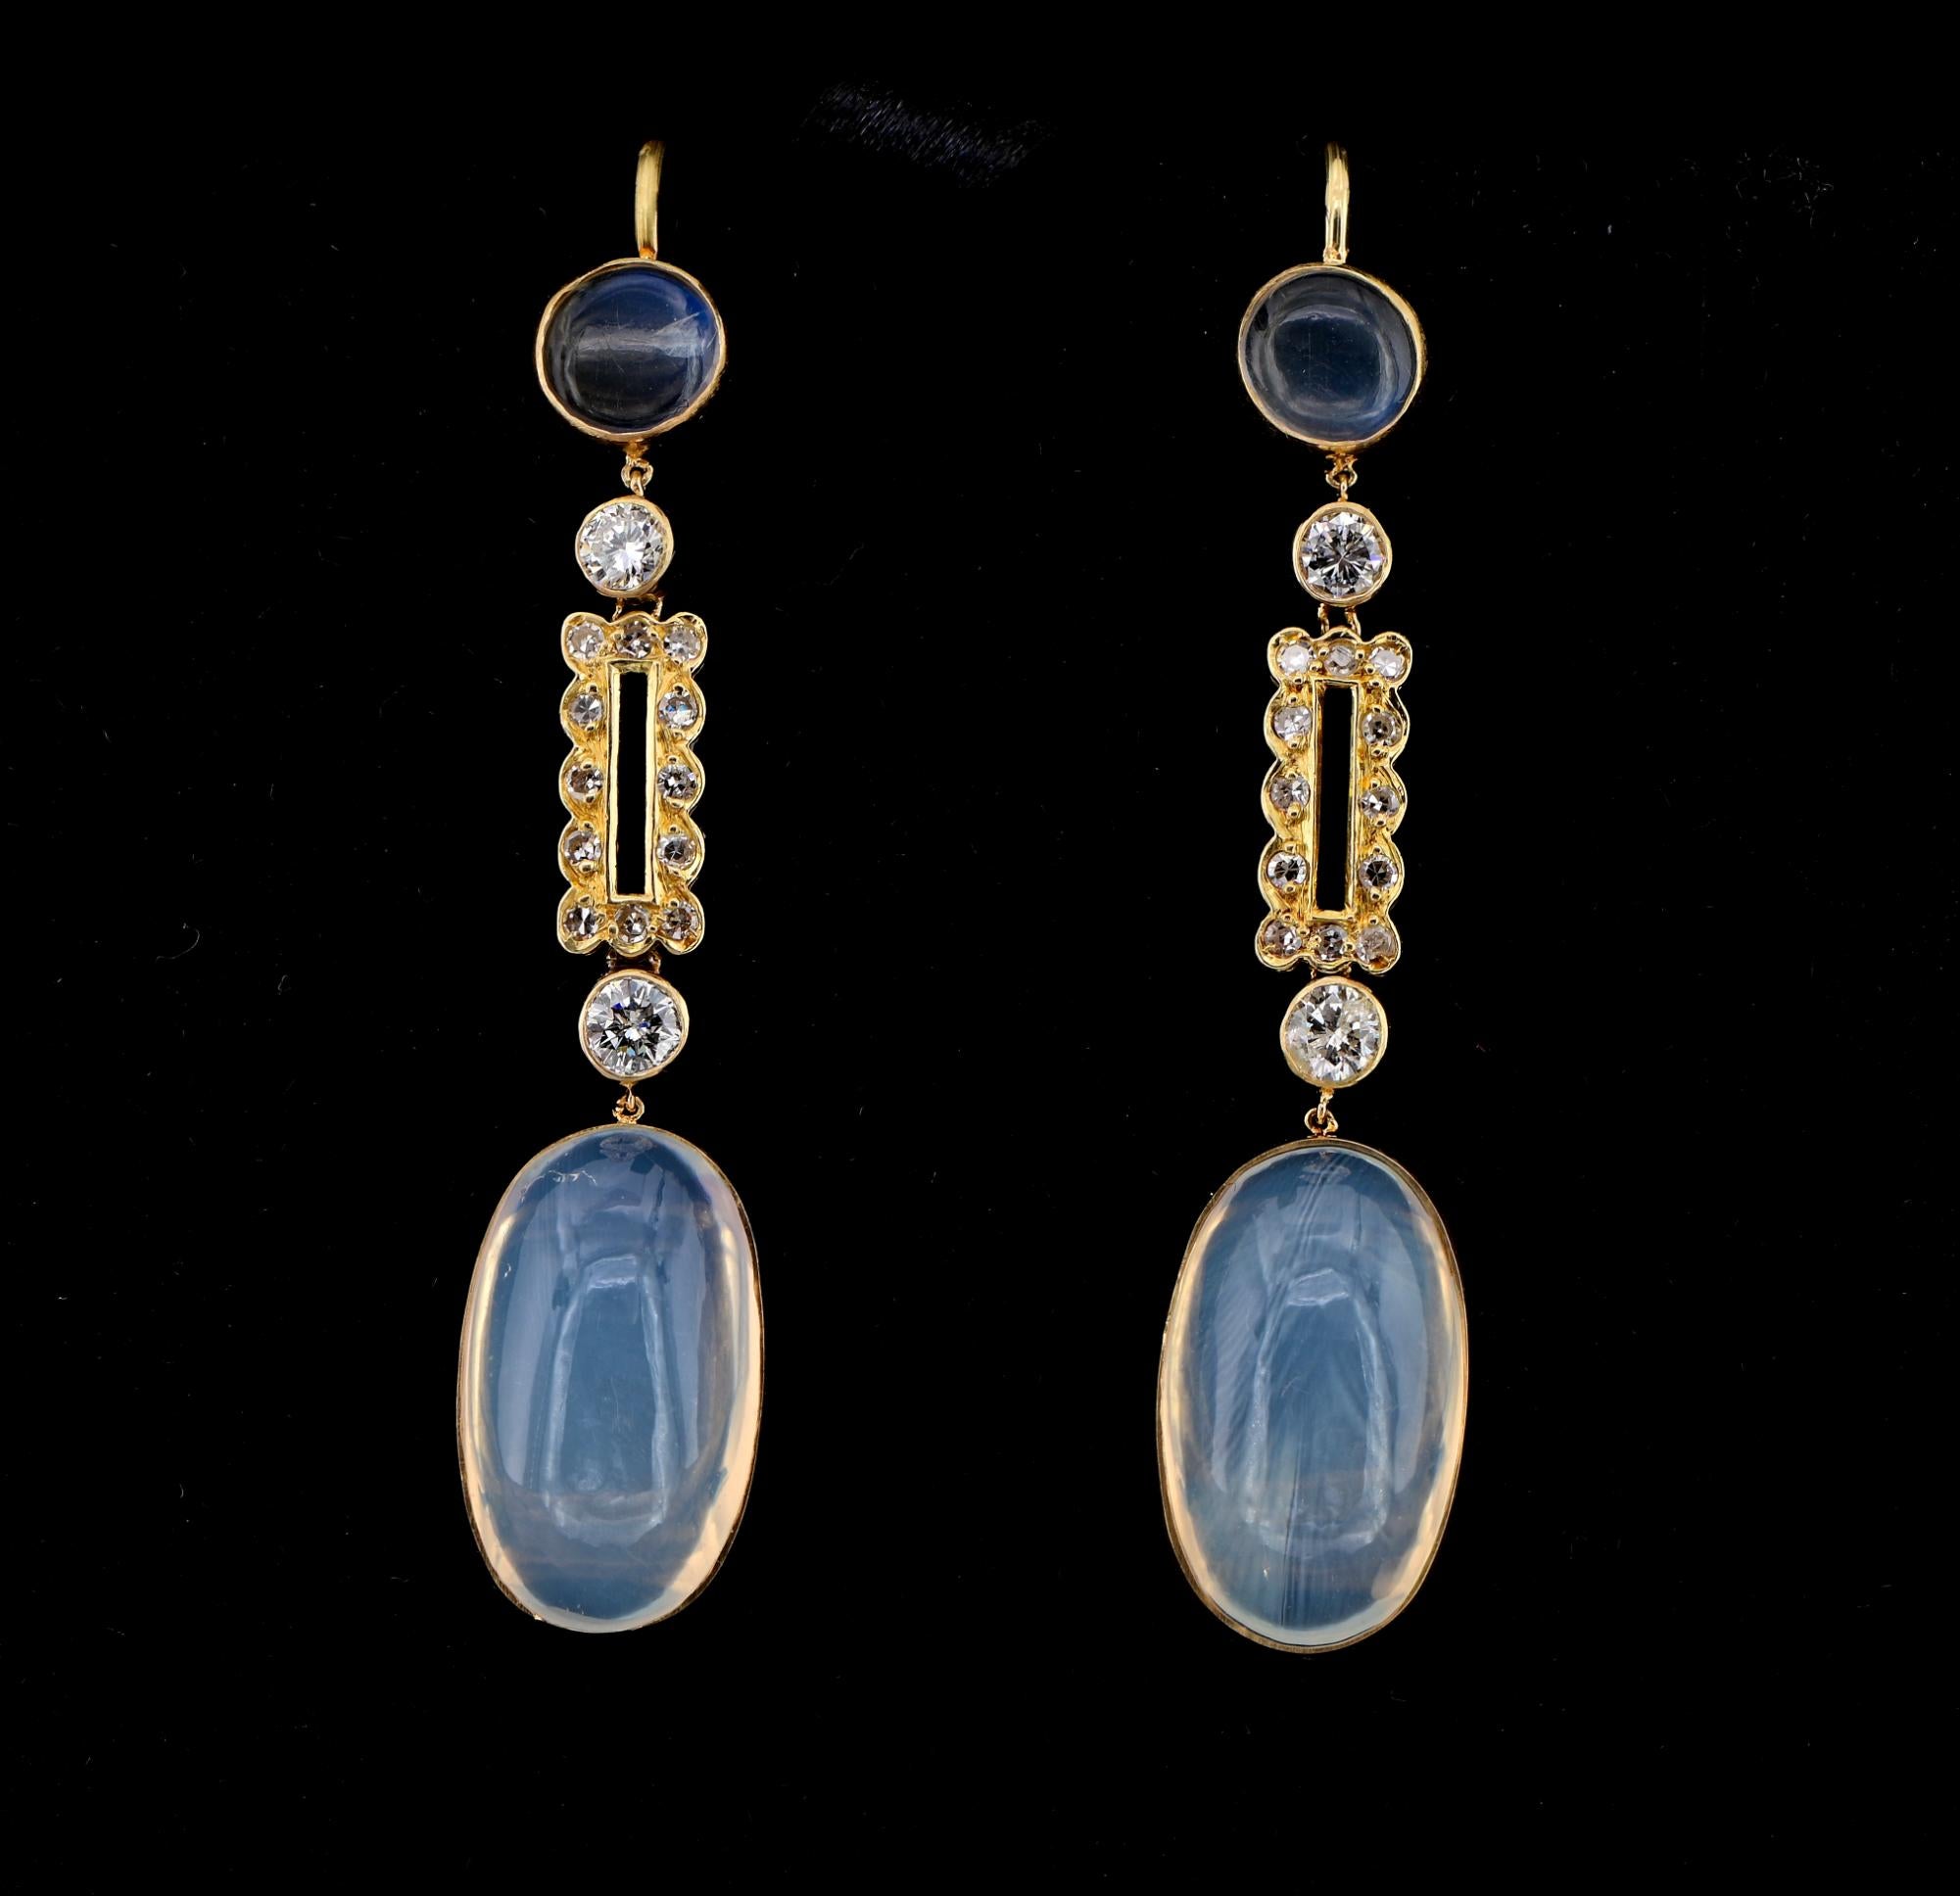 Magic Moon Magnetism
This outstanding pair of Art Deco period drop earrings are 1925 ca
Skillfully hand created of solid 18 KT gold in a tasteful and impressive elongated design to surpass time ahead with special expression of simple yet pure